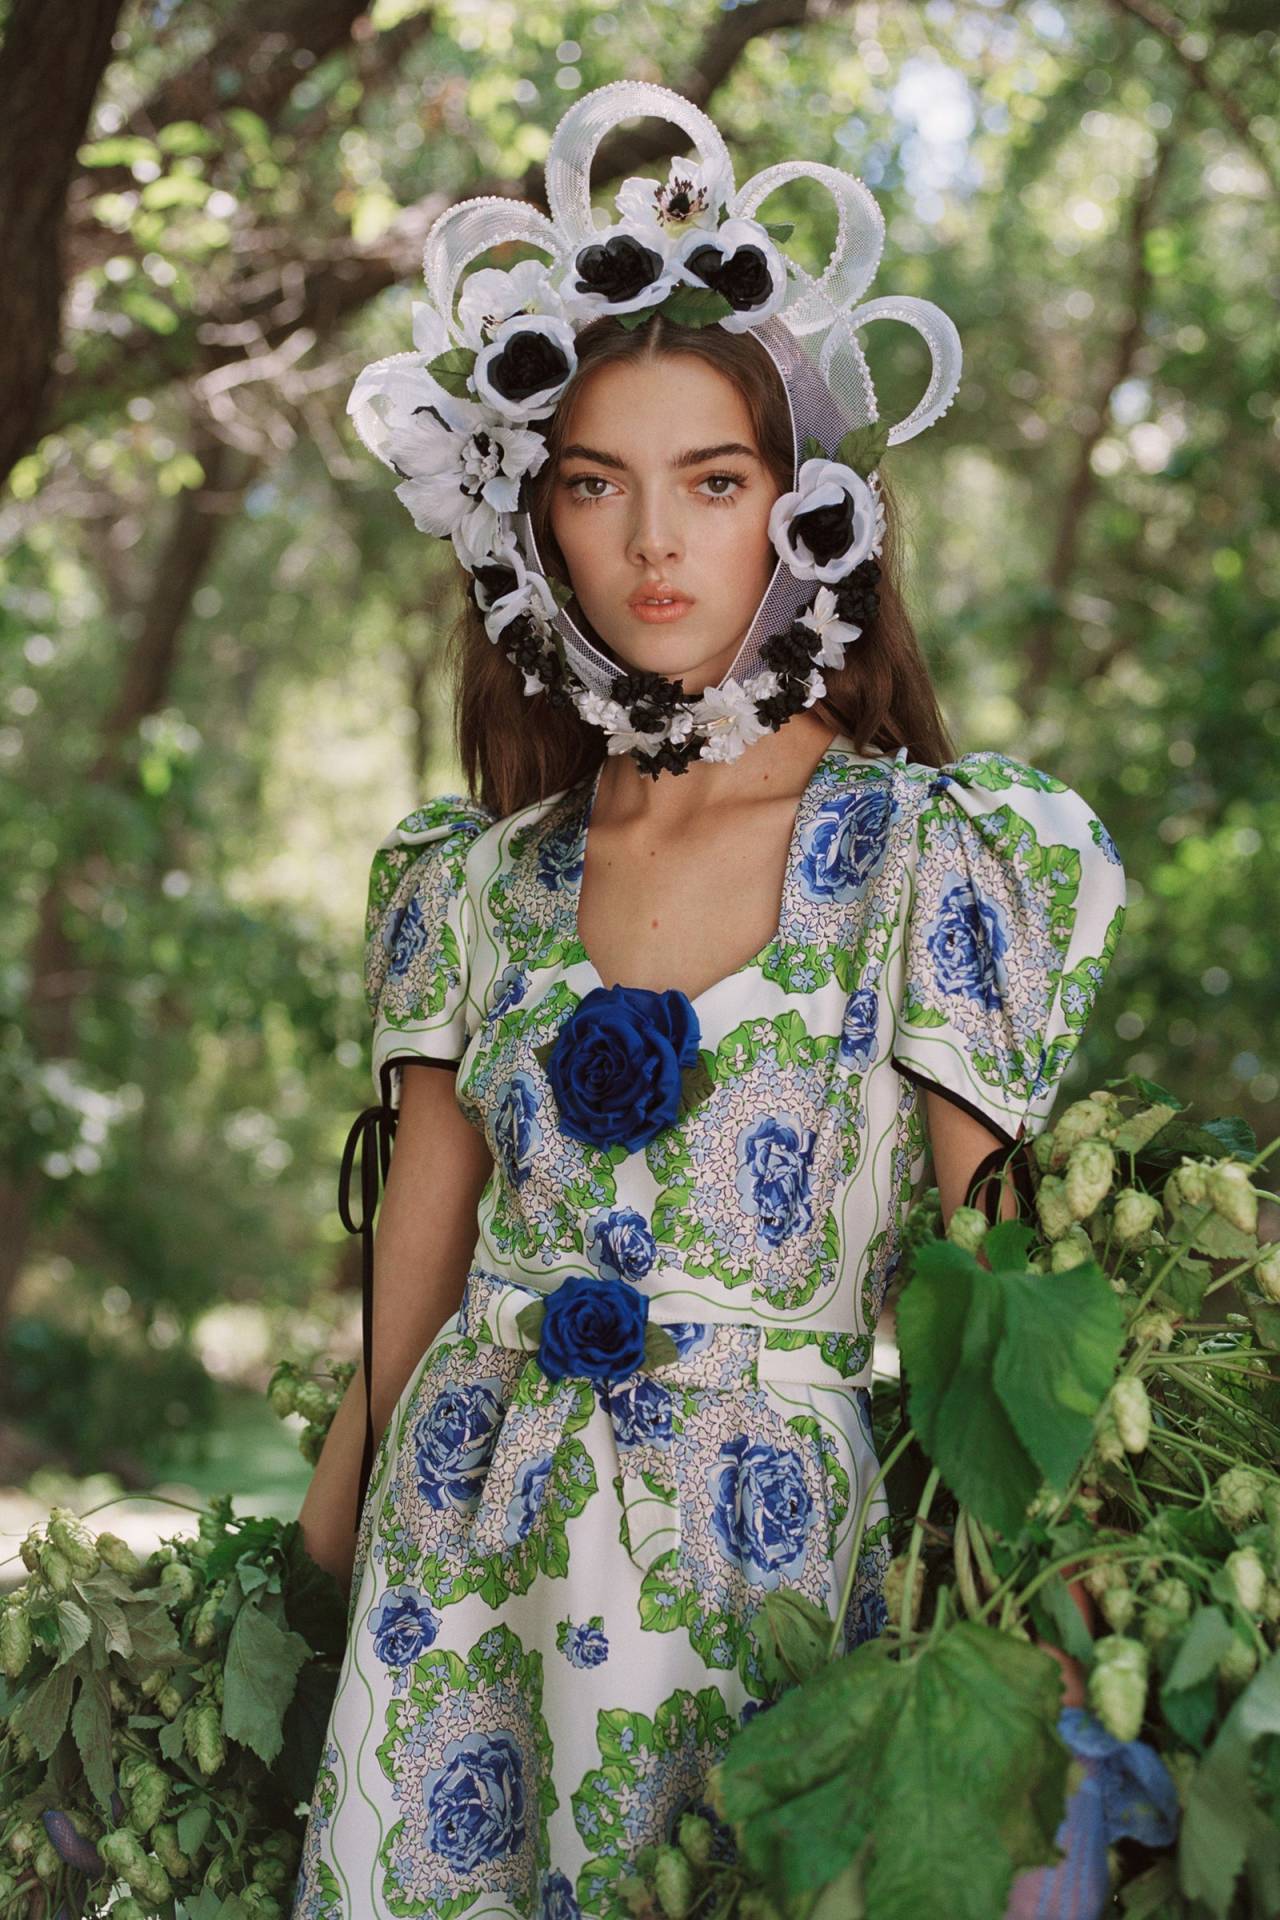 Lyanna Stark - Rodarte Spring 2021 #Lyanna Stark#house stark#the north #A Song of Ice and Fire  #game of thrones #floral#white#blue#headwear